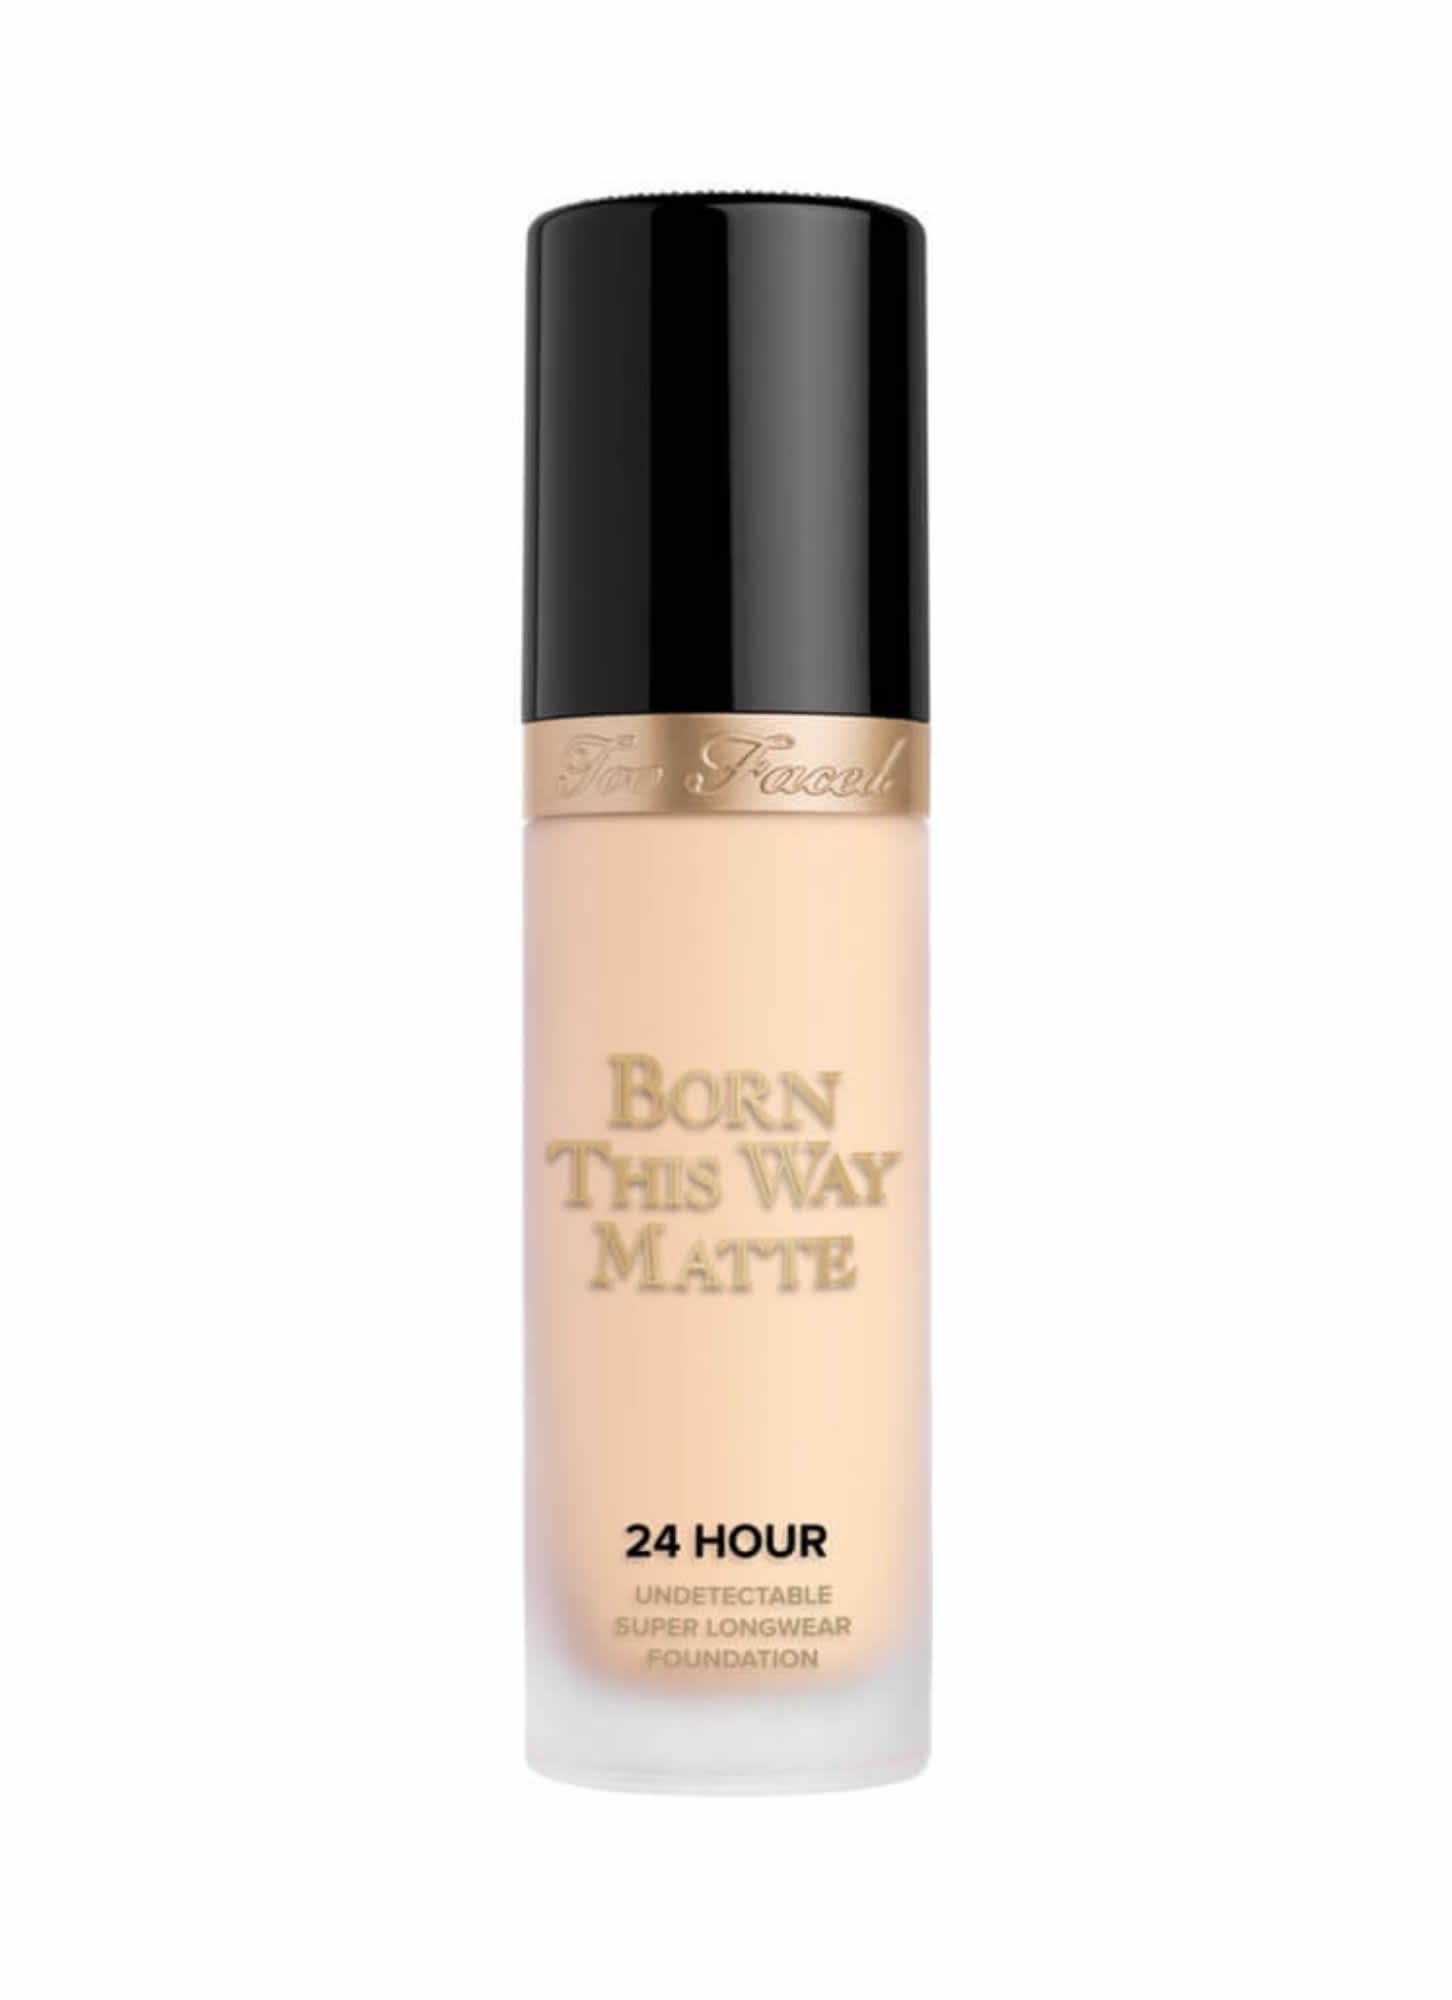 Too Faced, Born This Way Matte 24-Hour Undetectable Super Longwear Foundation